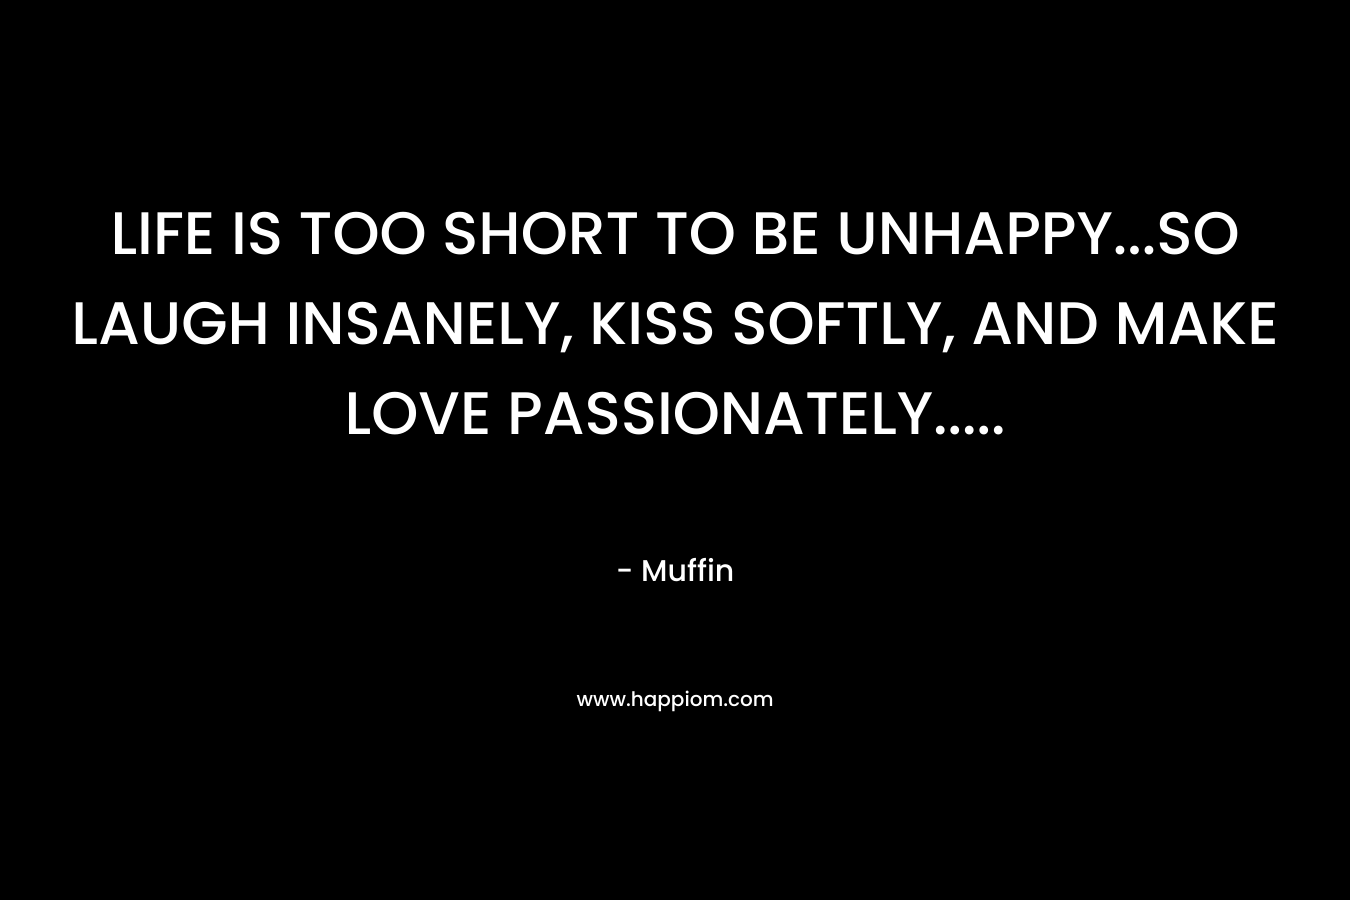 LIFE IS TOO SHORT TO BE UNHAPPY…SO LAUGH INSANELY, KISS SOFTLY, AND MAKE LOVE PASSIONATELY….. – Muffin